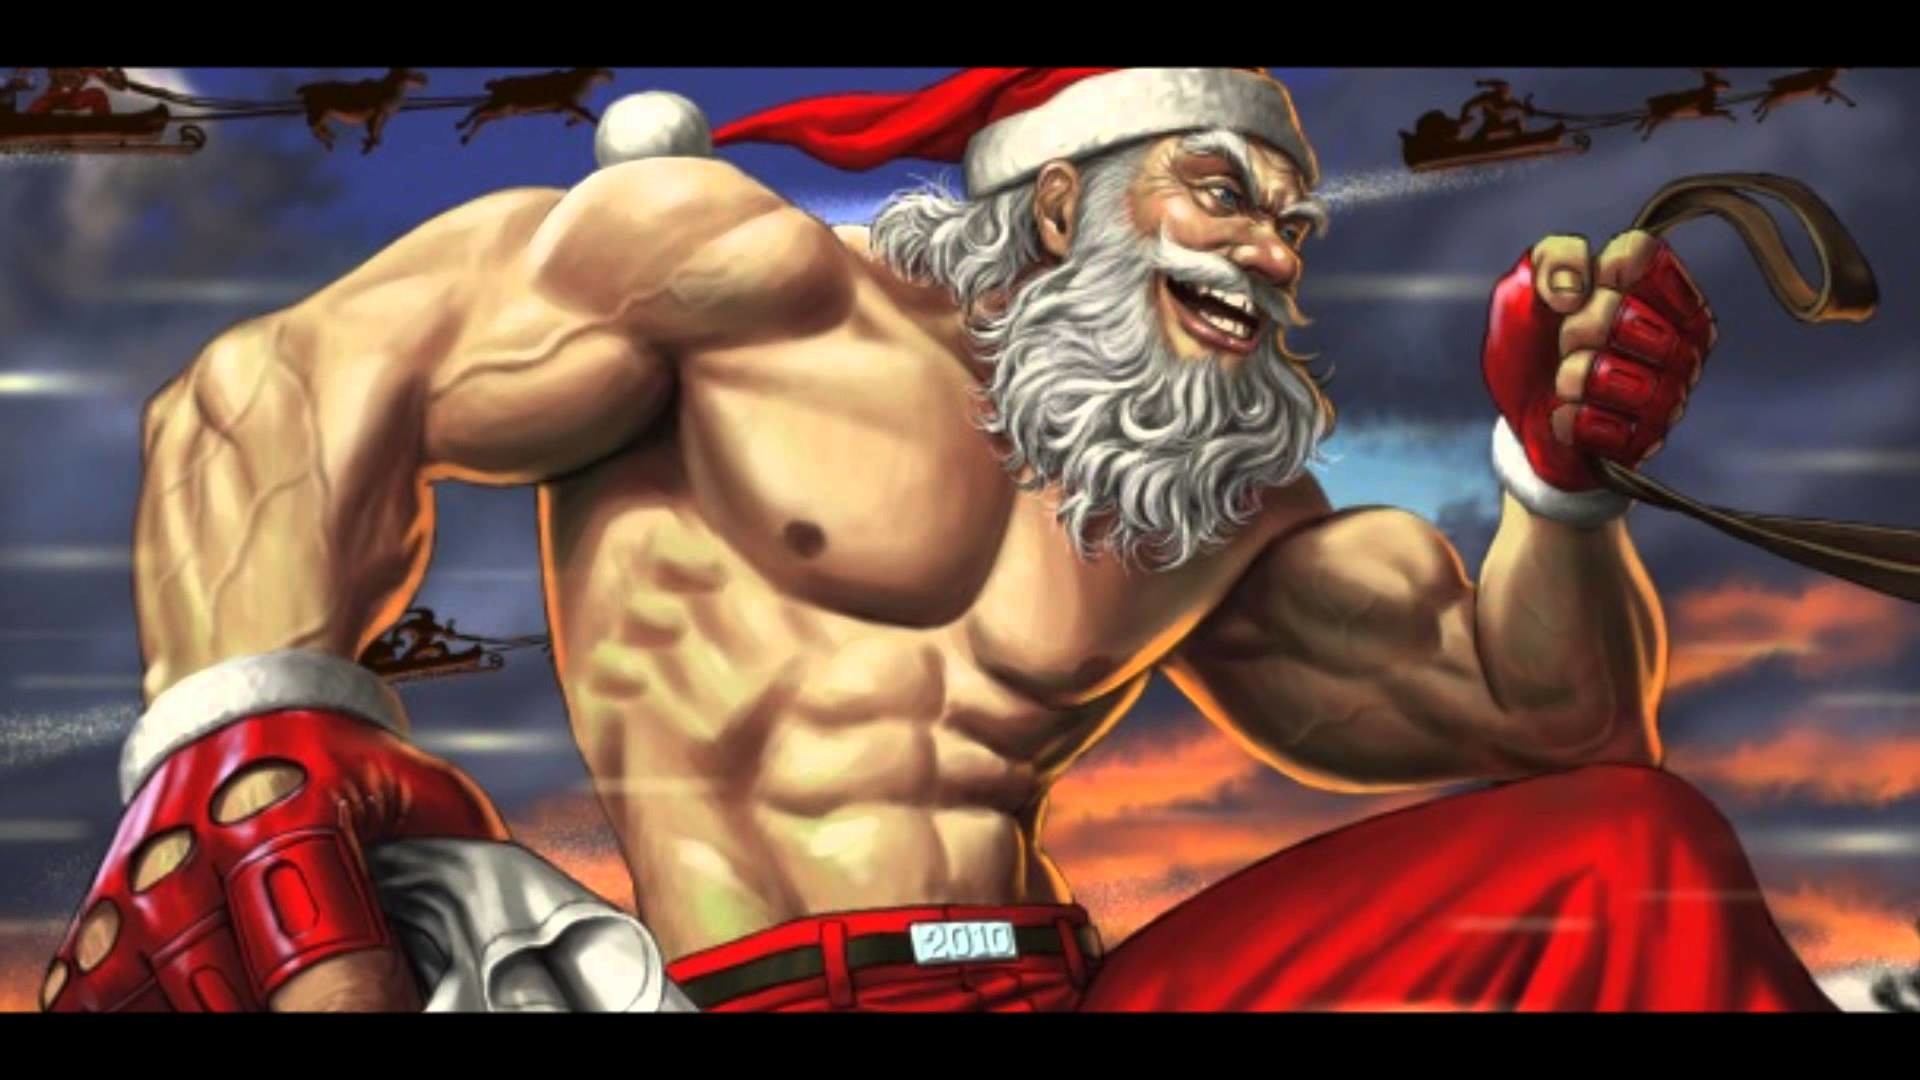 1920x1080 HENRY ROLLINS - TWAS THE NIGHT BEFORE CHRISTMAS